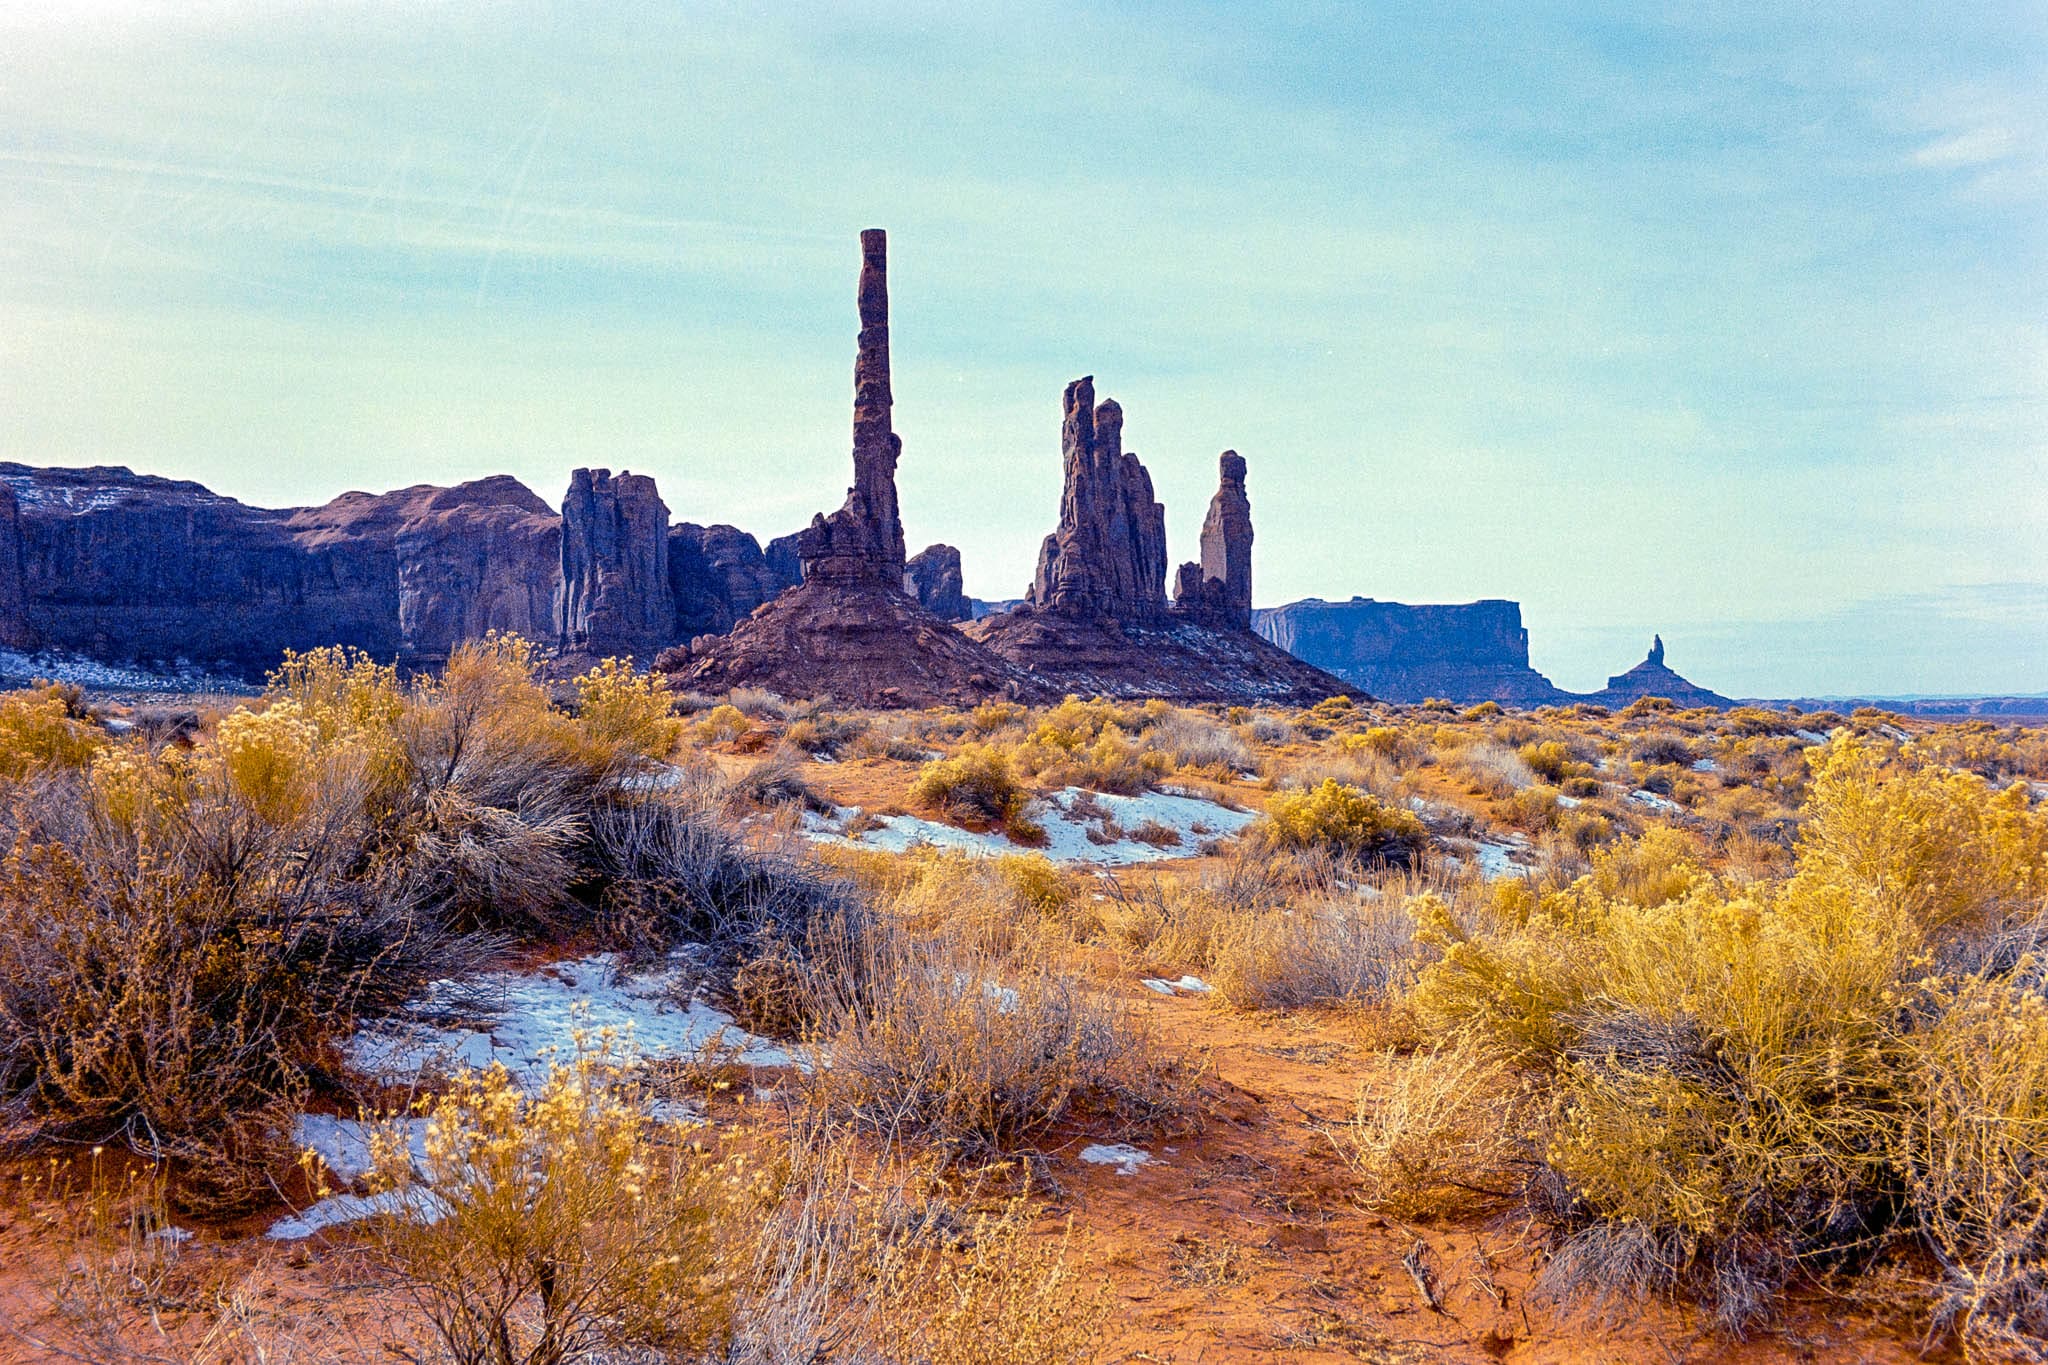 Dramatic desert scene with towering buttes and vibrant vegetation under a clear blue sky.